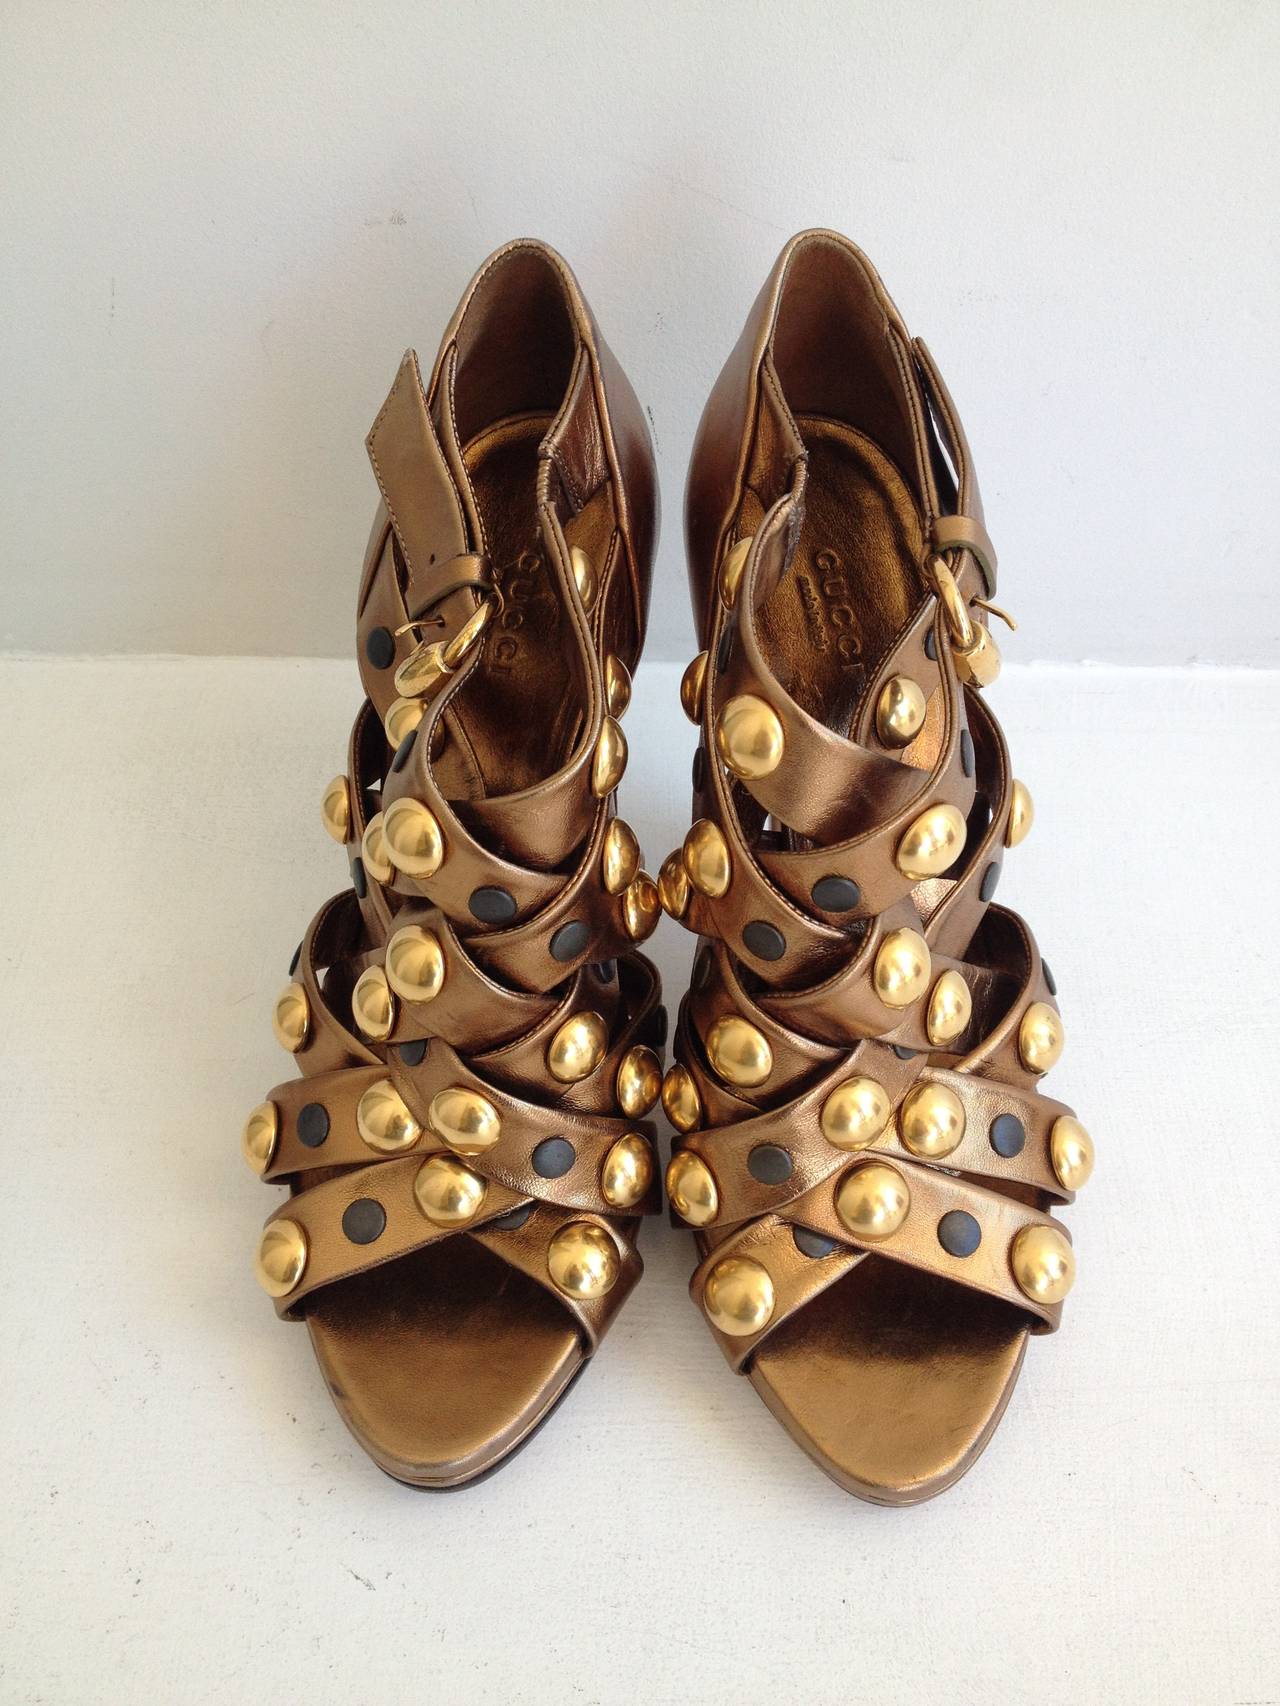 These sandals truly pack a punch! The metallic bronze leather is gleaming, punctuated with a constellation of giant gold semi-spheres and smaller matte black flattened studs. The 4.5 inch heel is made more walkable by the .5 inch platform. These